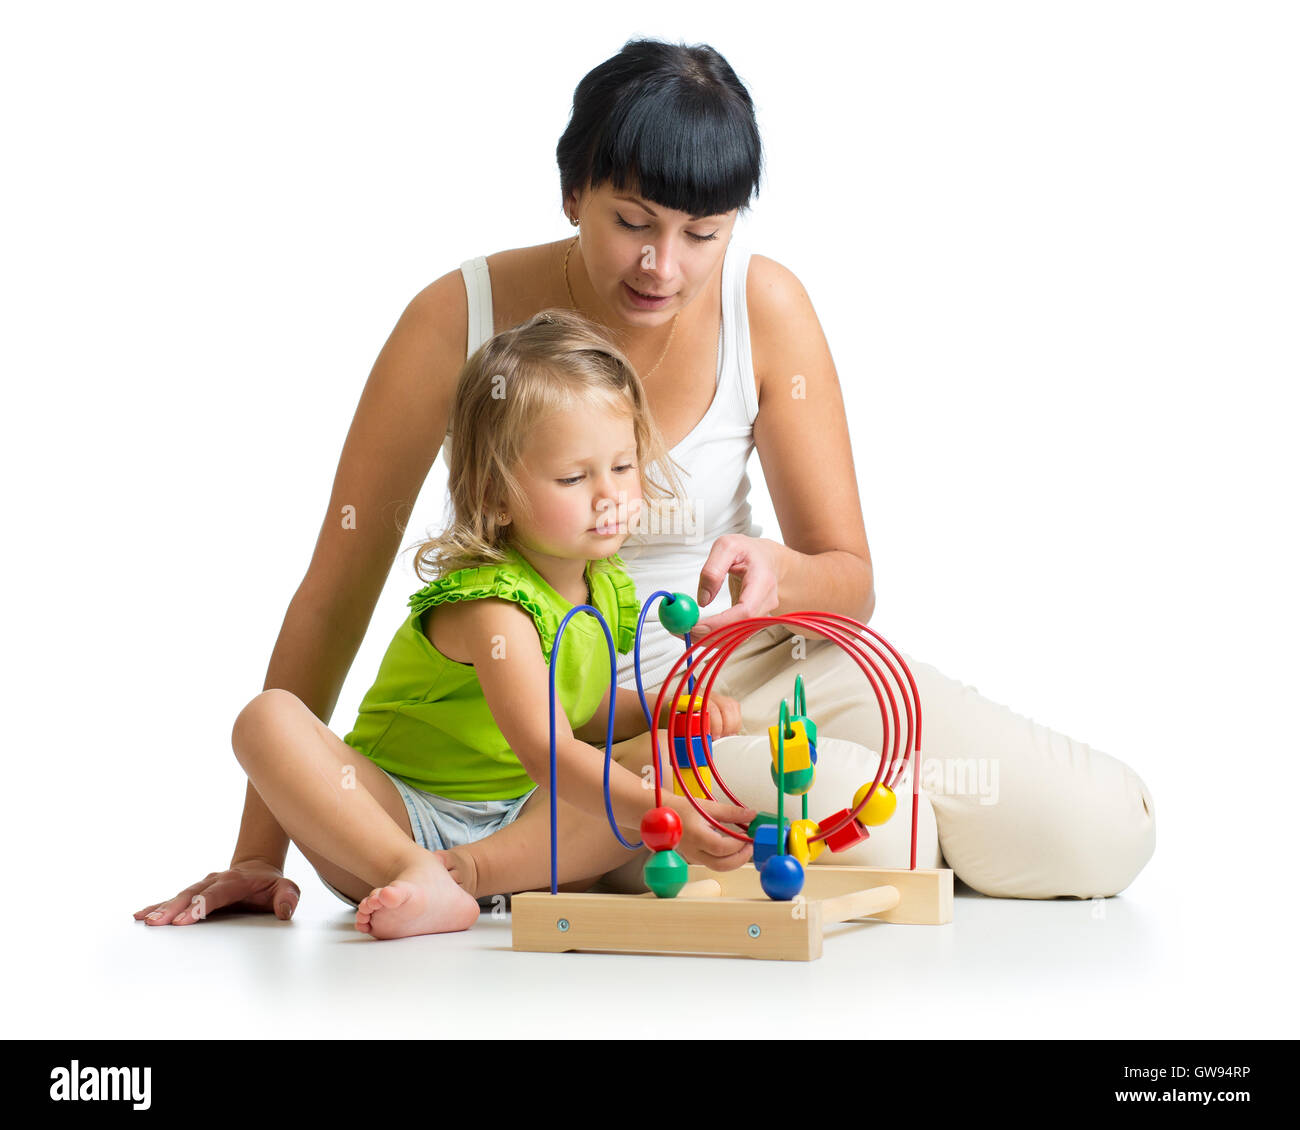 kid and mother playing with educational toy Stock Photo